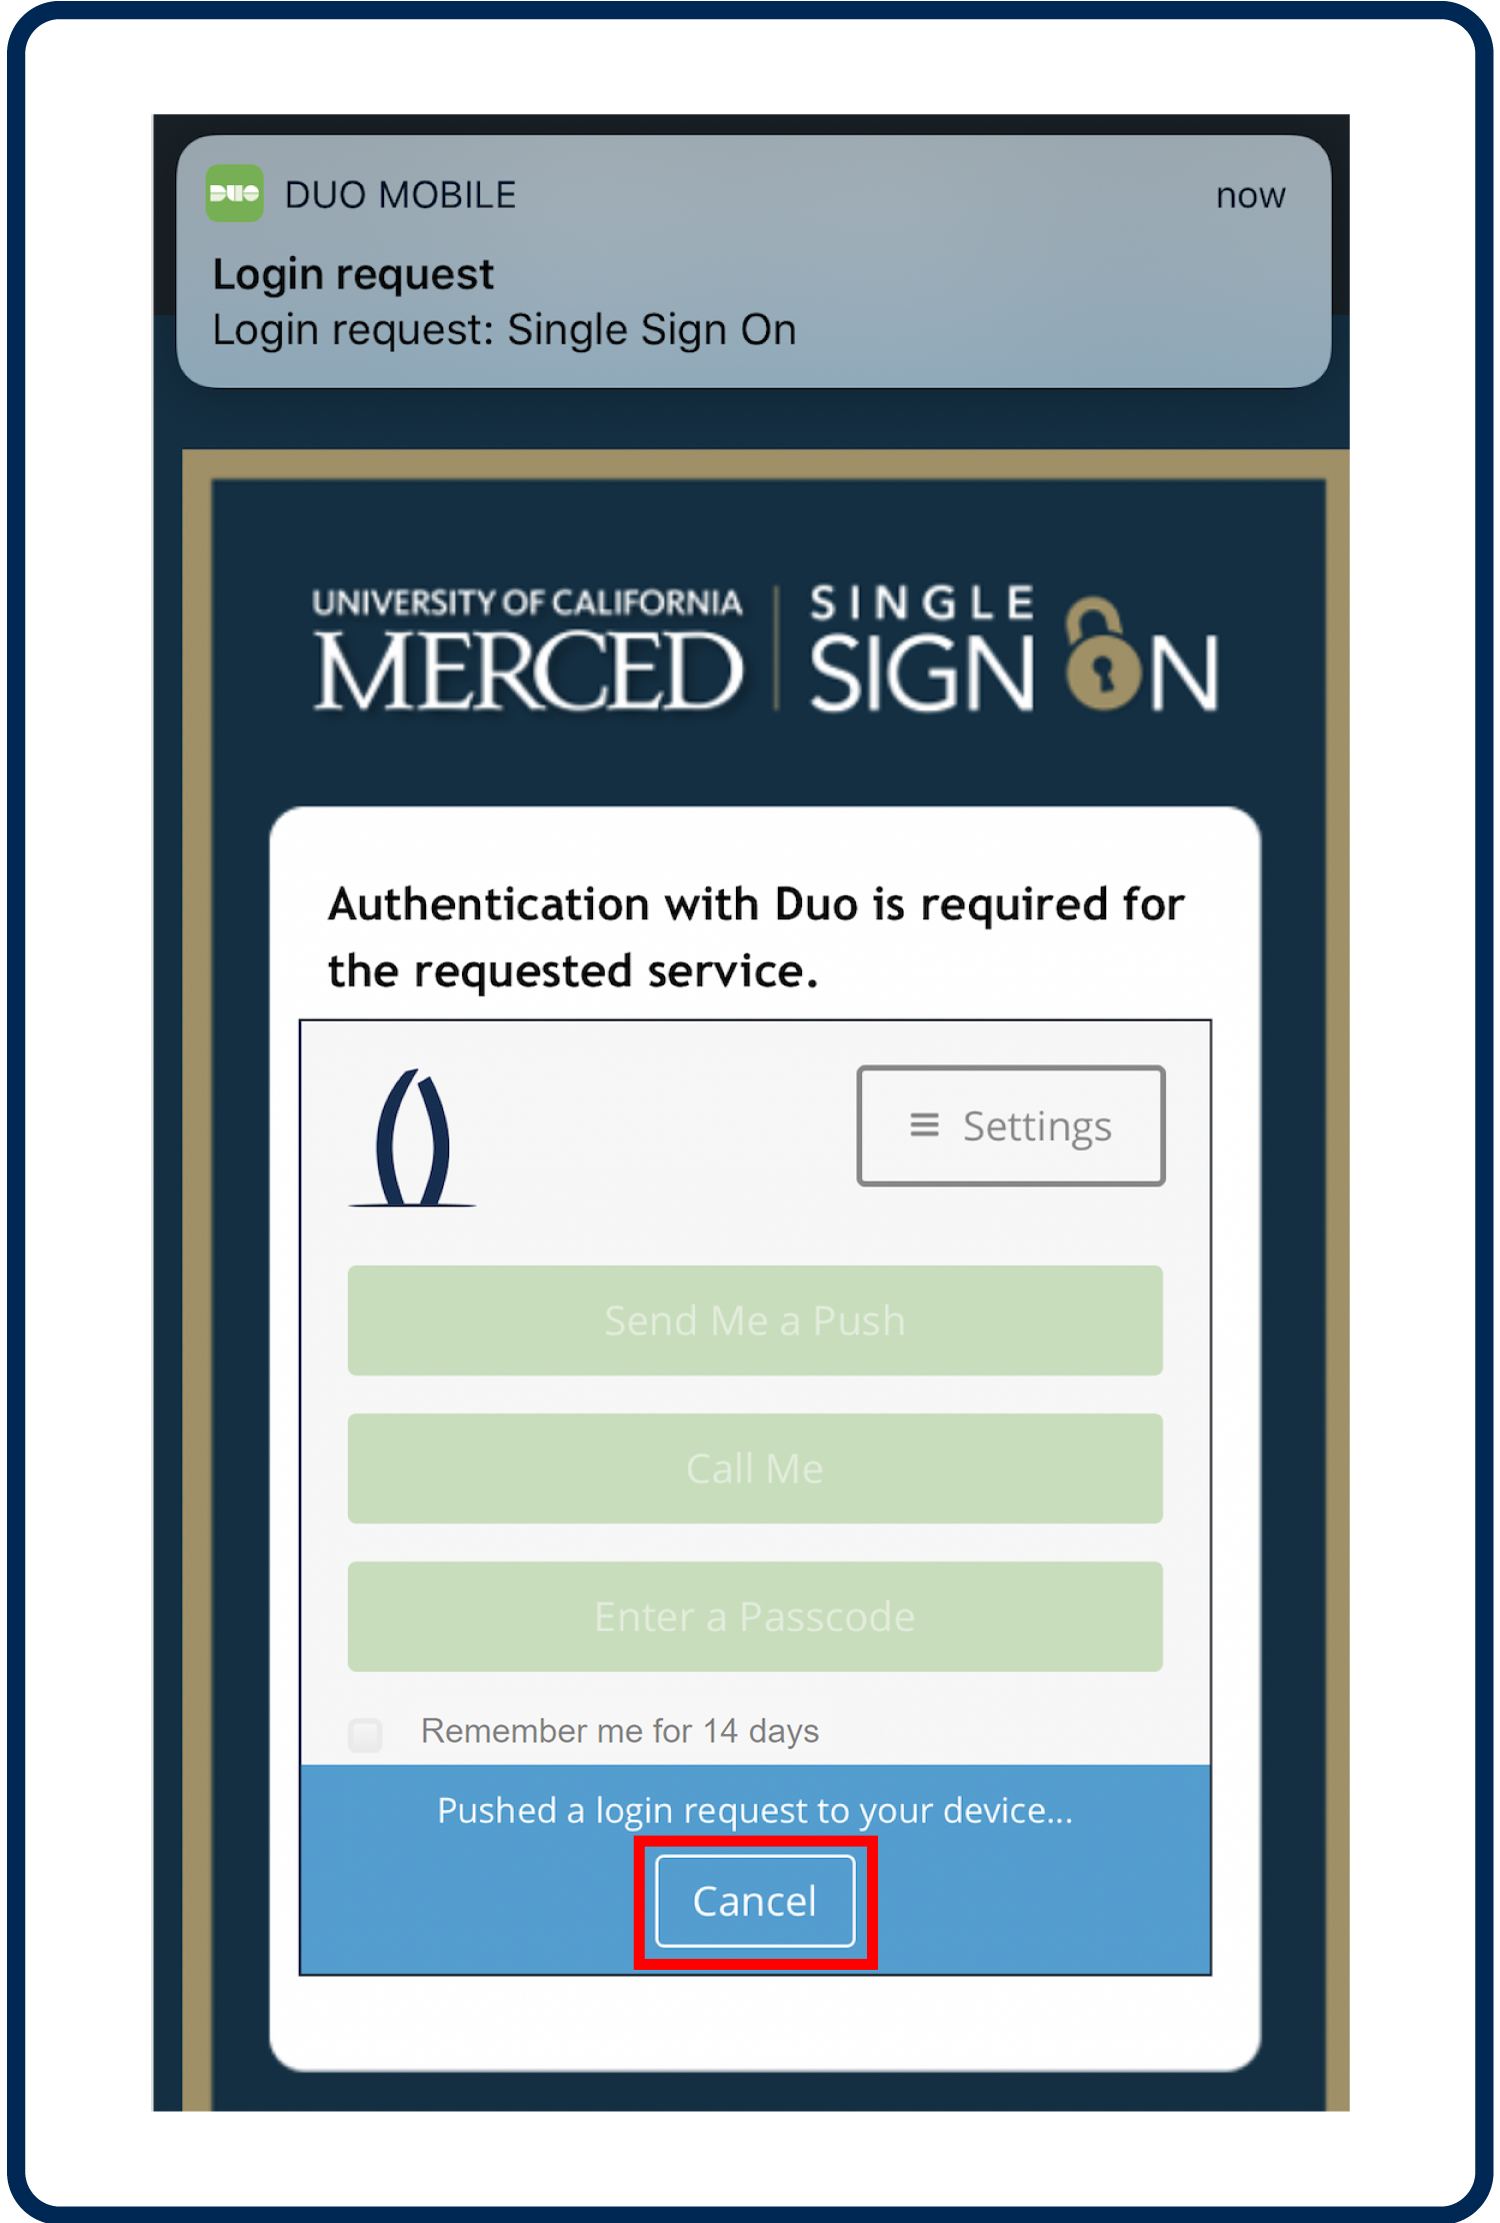 Screenshot of UC Merced Single Sign on page with a Duo notification and a box around the "Cancel" button at the bottom of the screen